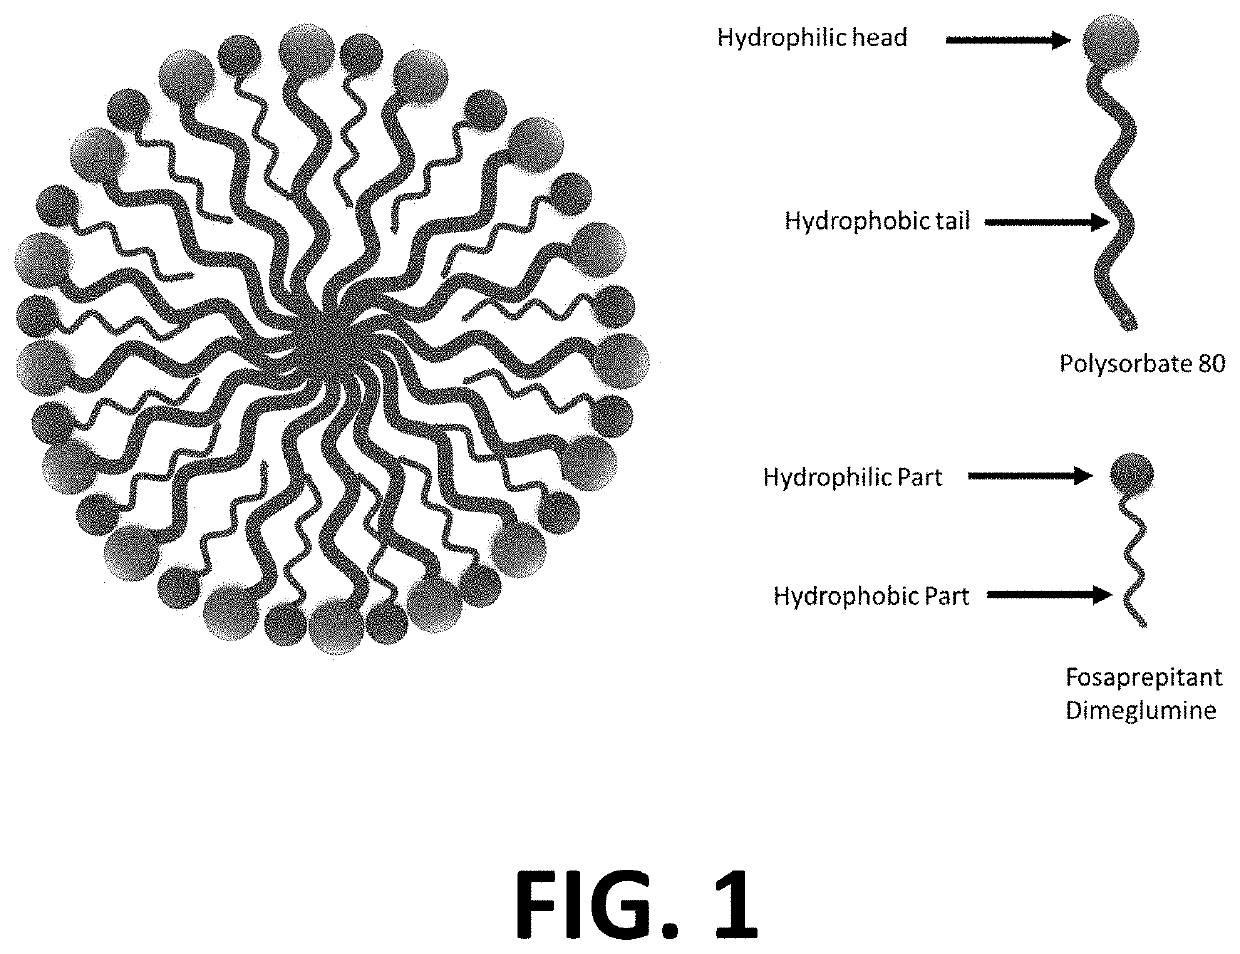 Injectable Combination Products Of Fosaprepitant And 5-HT3 Blocker